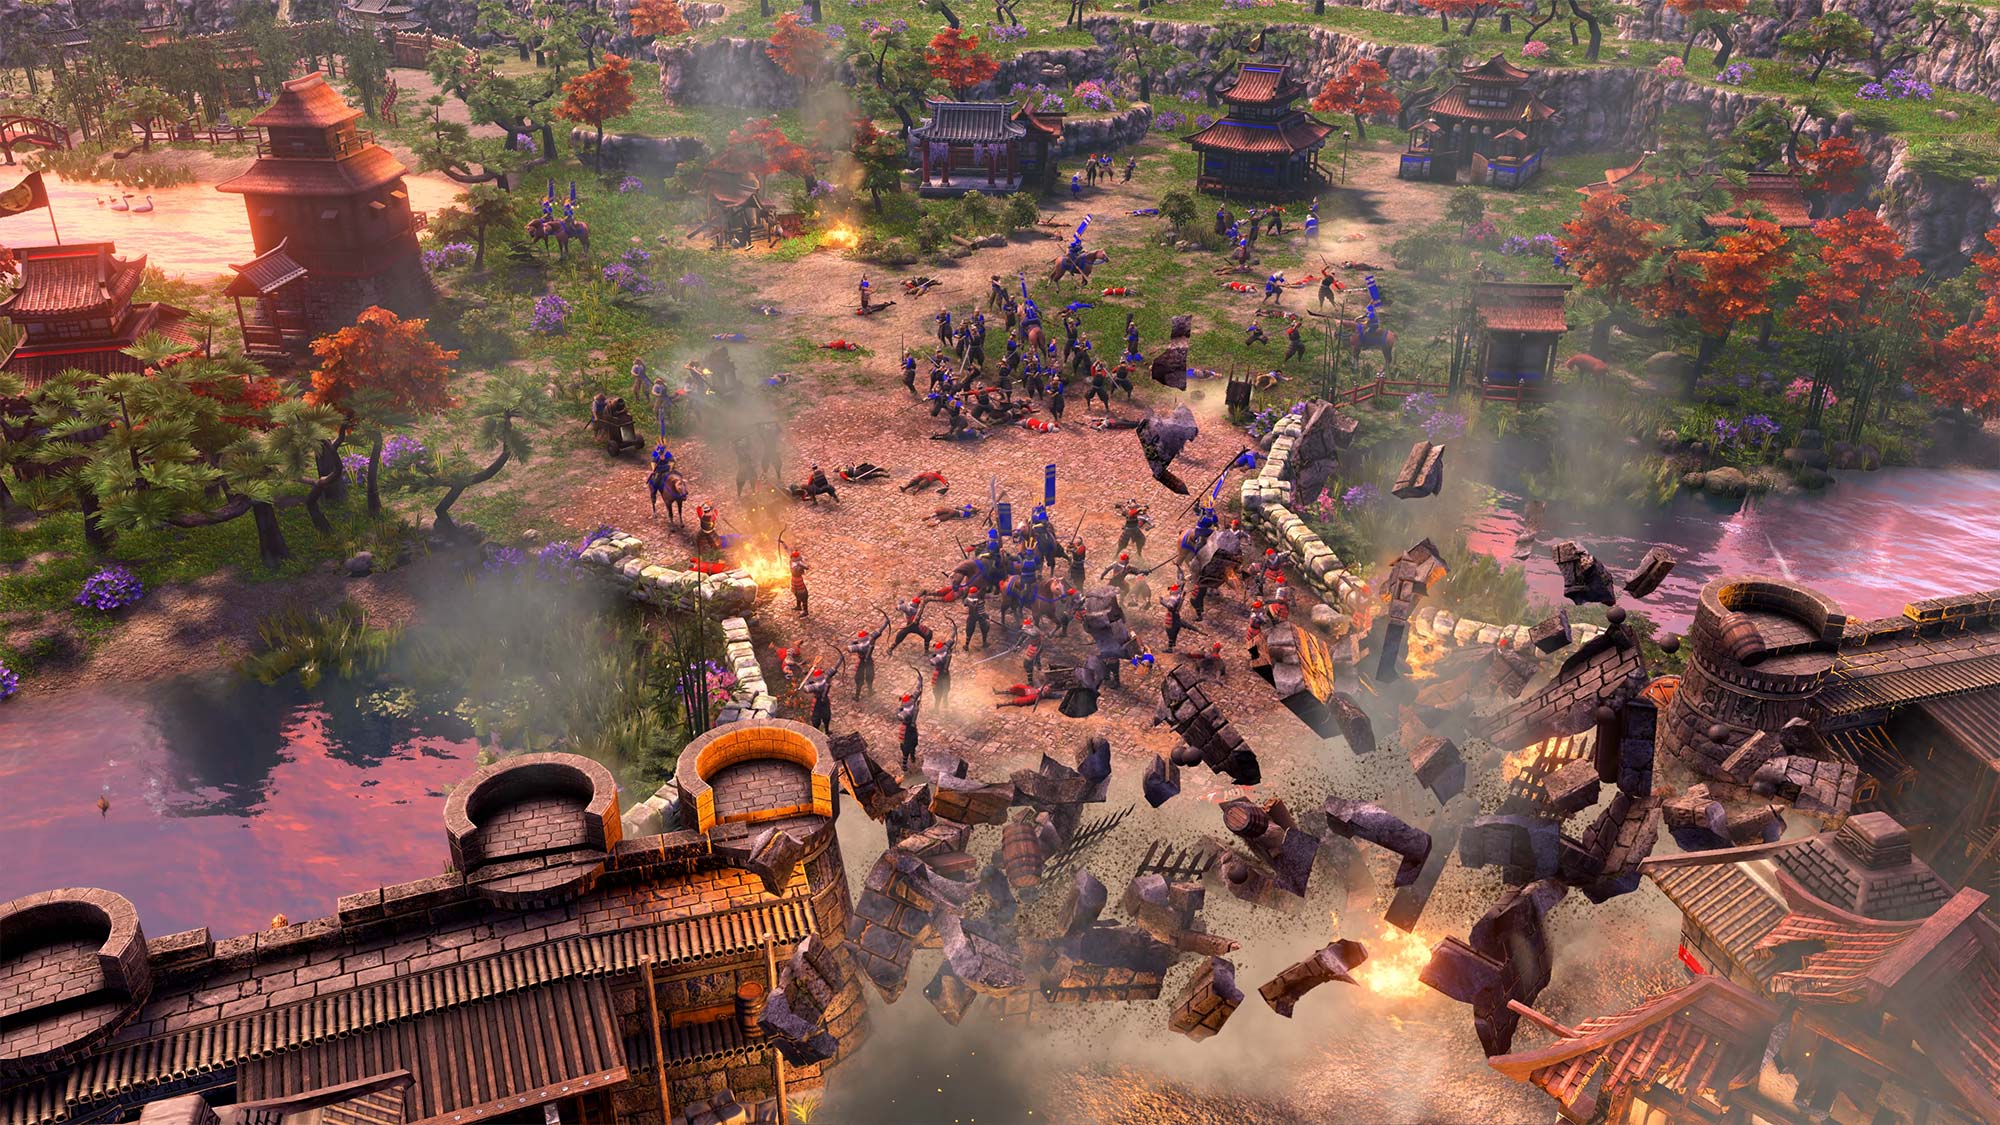 Age Of Empires Iii Definitive Edition Aims To Modernize The Overlooked Entry In The Iconic Rts Series